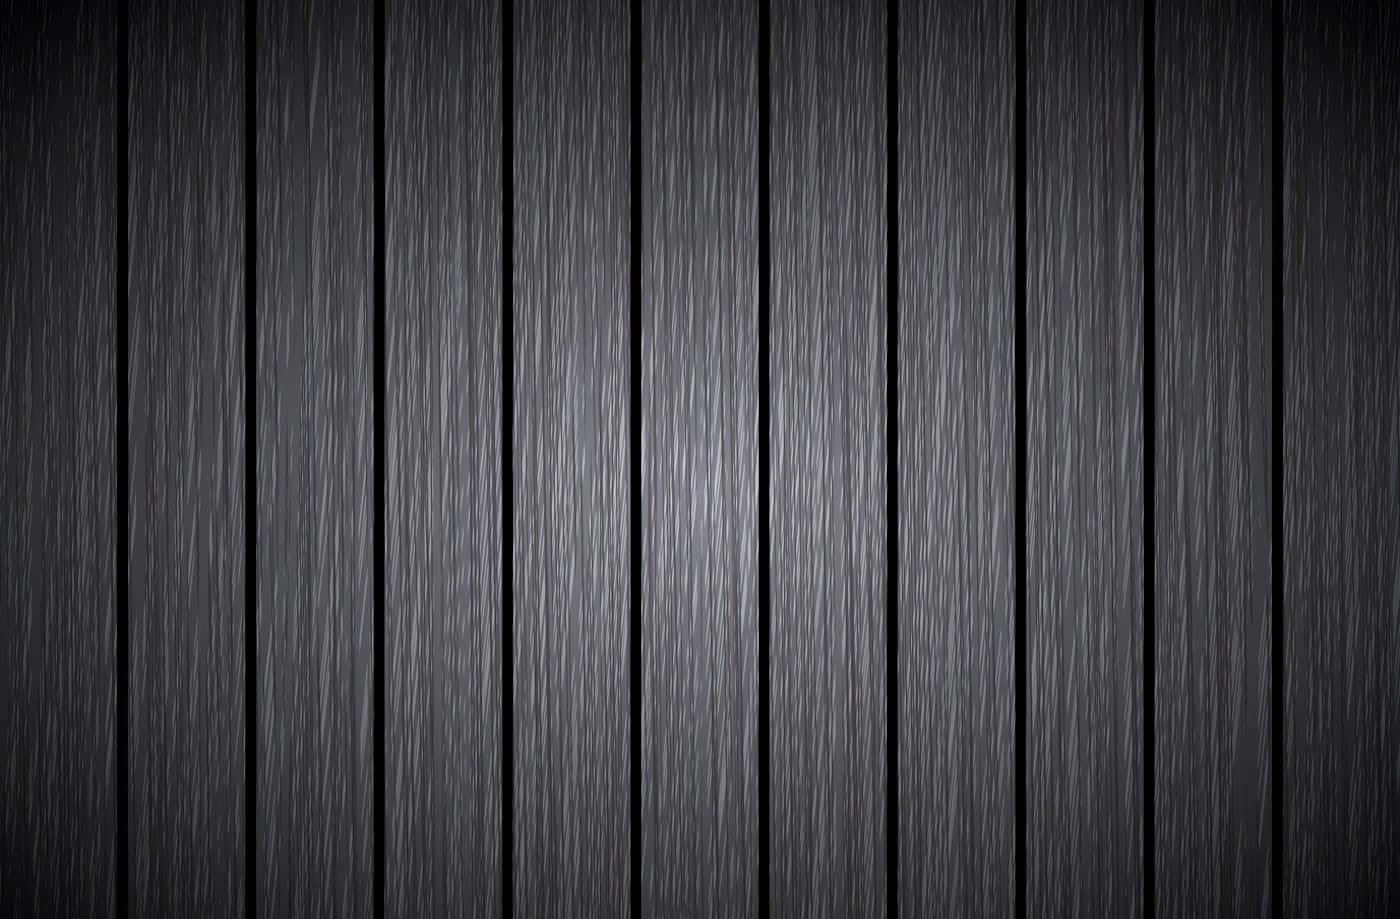 Exquisite Gray Wood Background